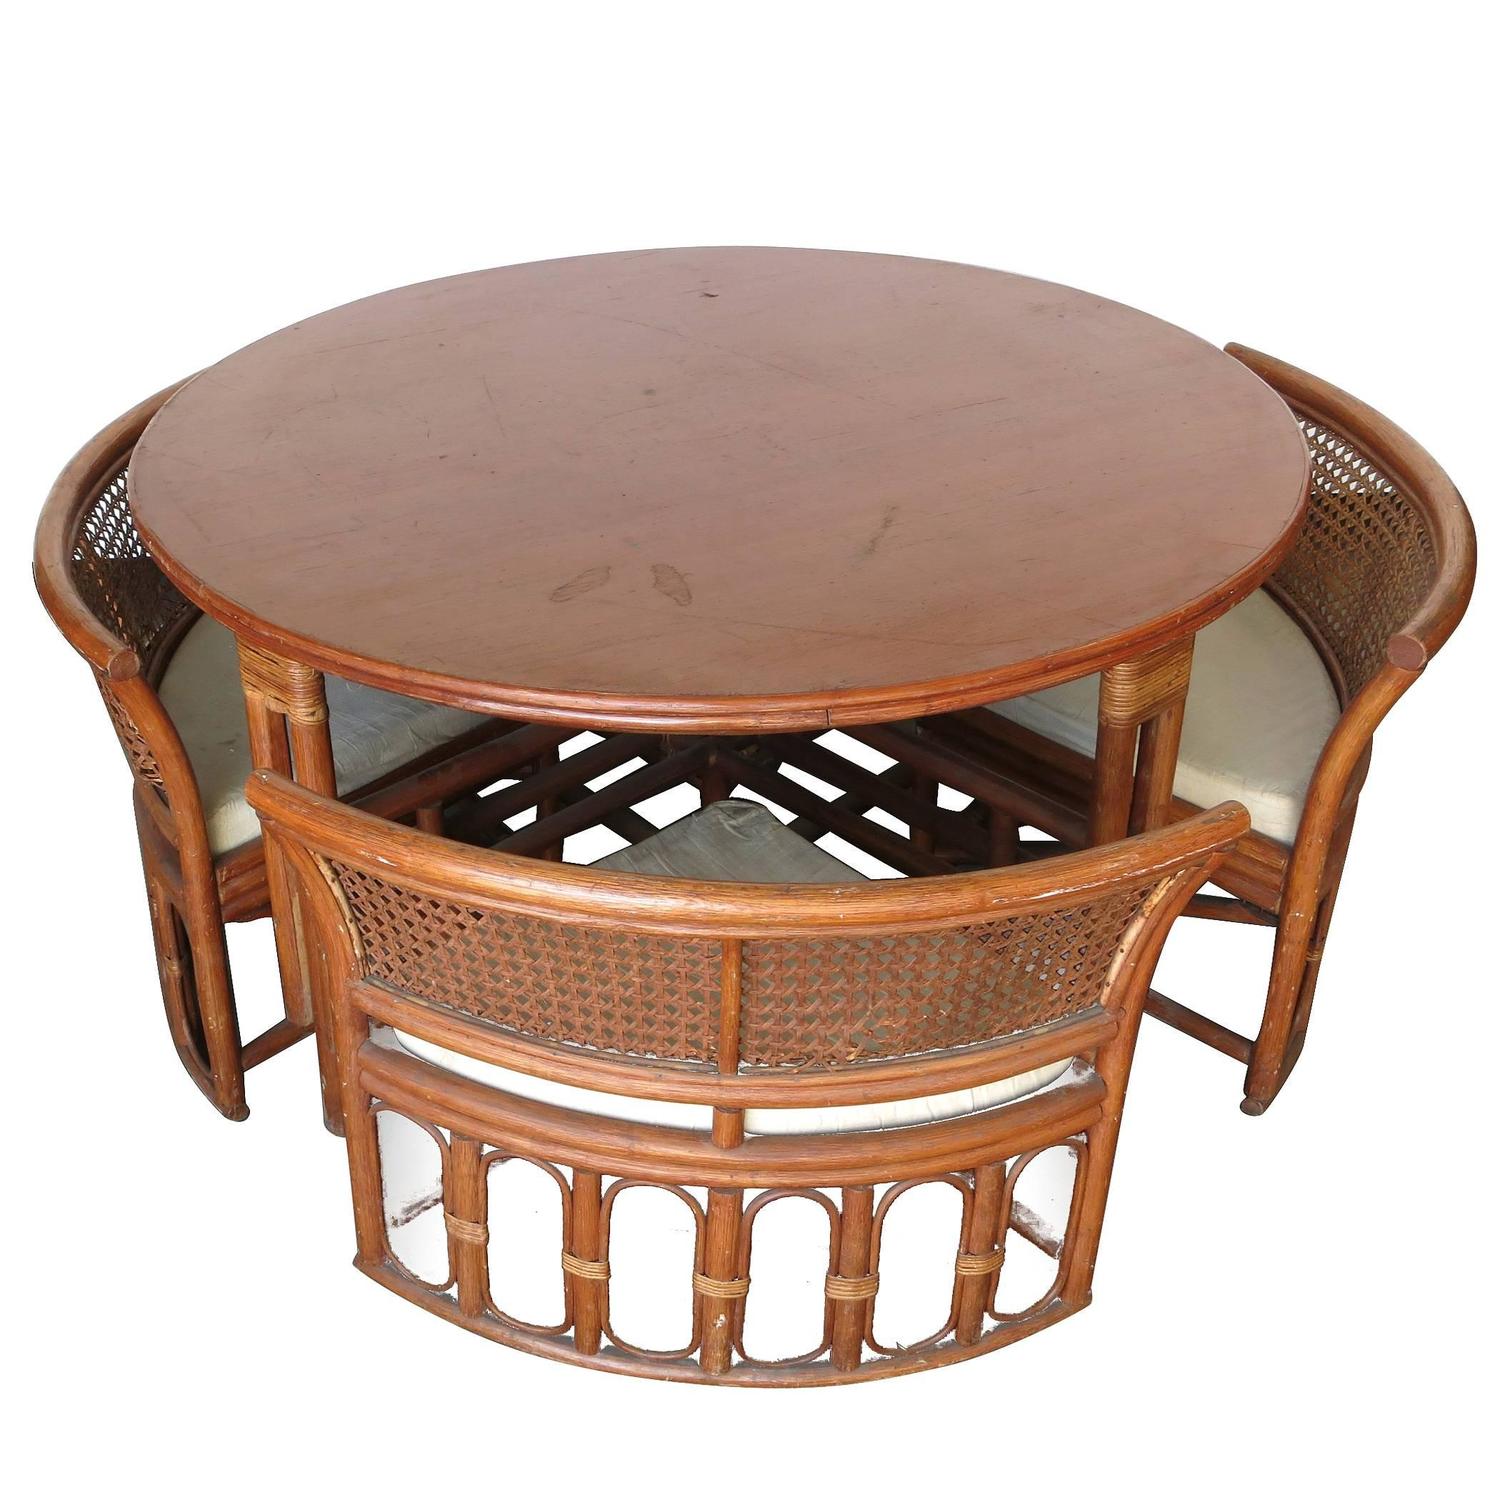 Rattan and Wicker Dining/Coffee Table with Hidden Chairs at 1stdibs